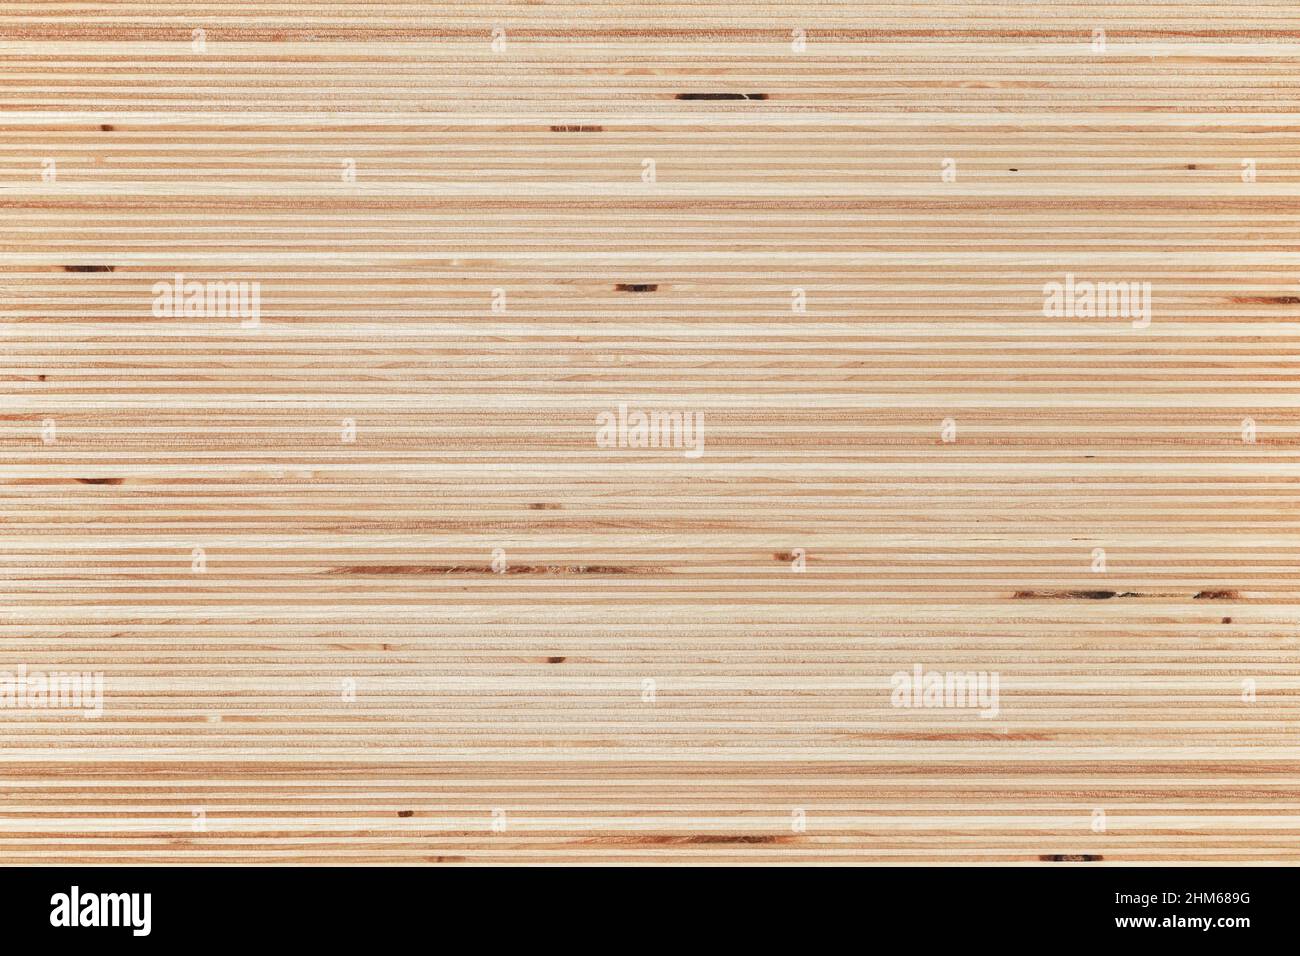 Striped wooden texture. Background of a decorative board. Stock Photo